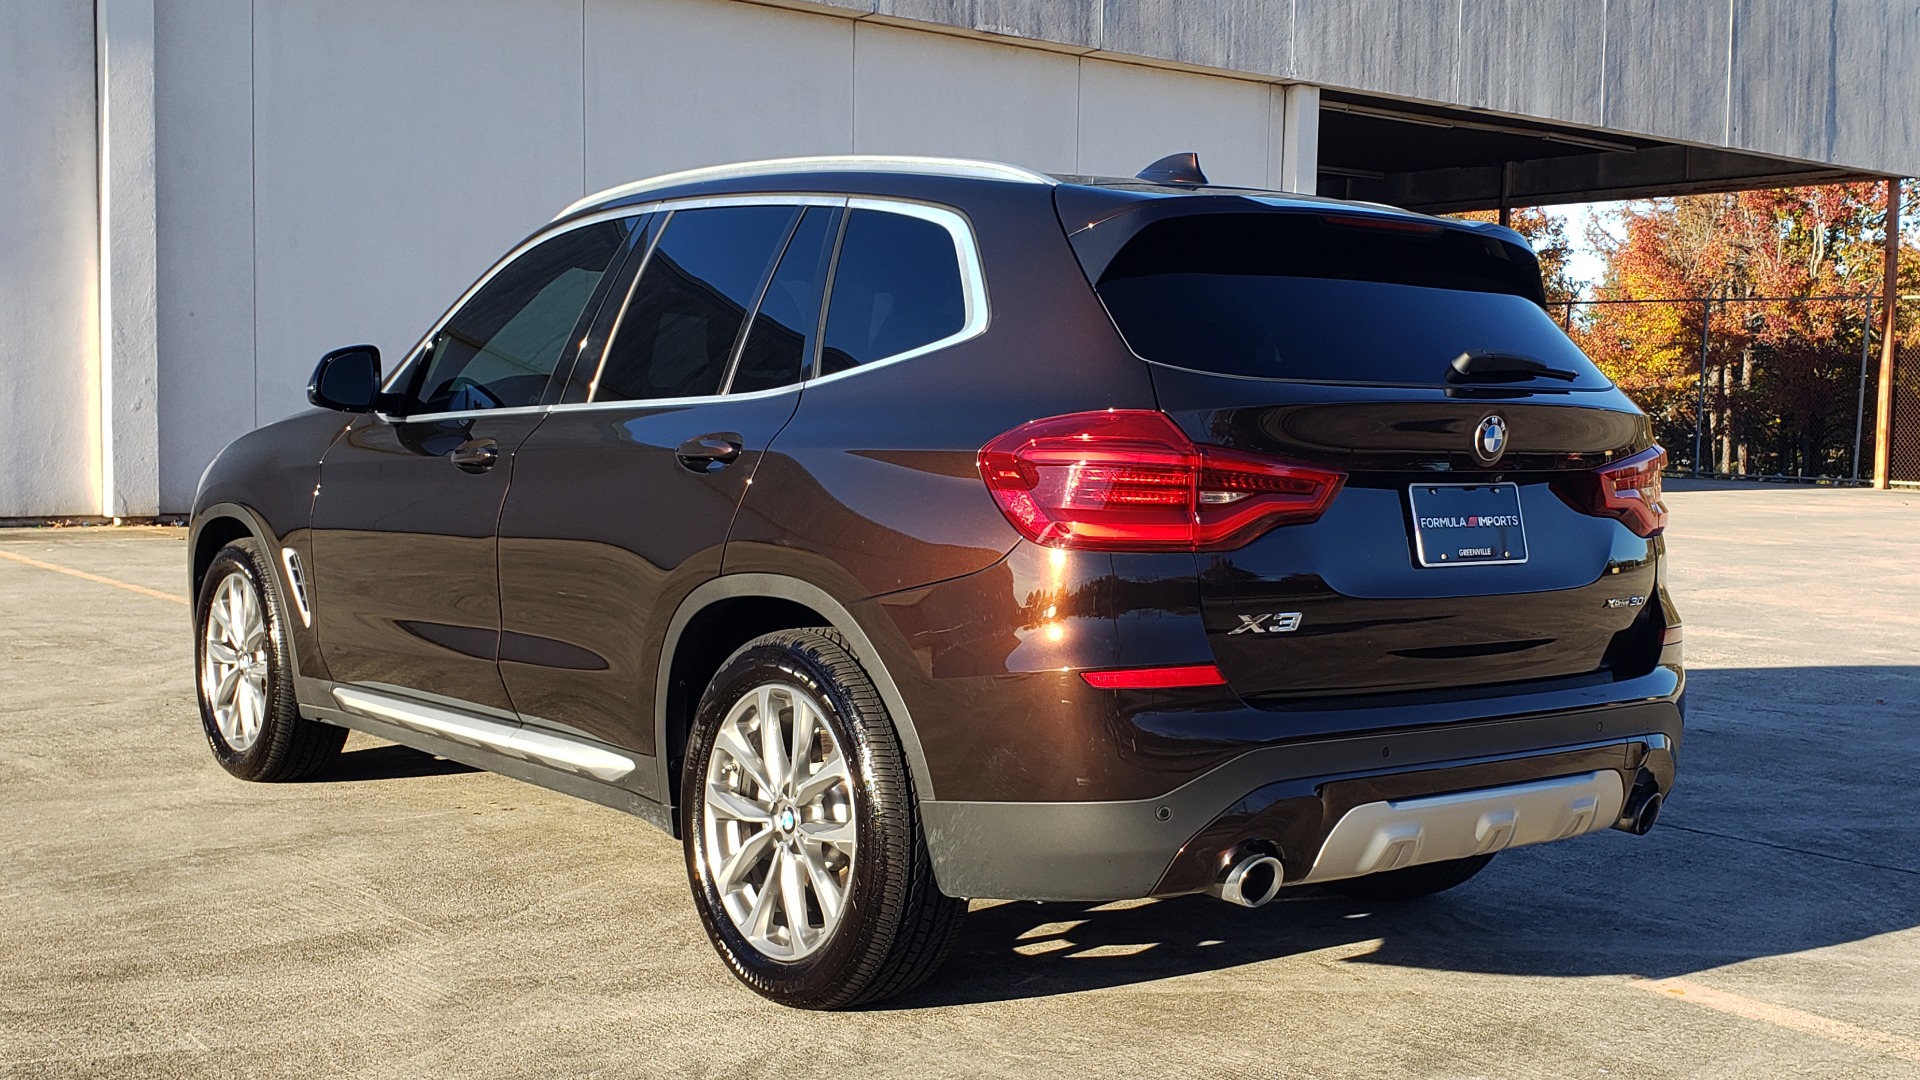 Used 2018 BMW X3 XDRIVE30I / NAV / PANO-ROOF / HTD STS / PARK DIST CNTRL / REARVIEW for sale Sold at Formula Imports in Charlotte NC 28227 5